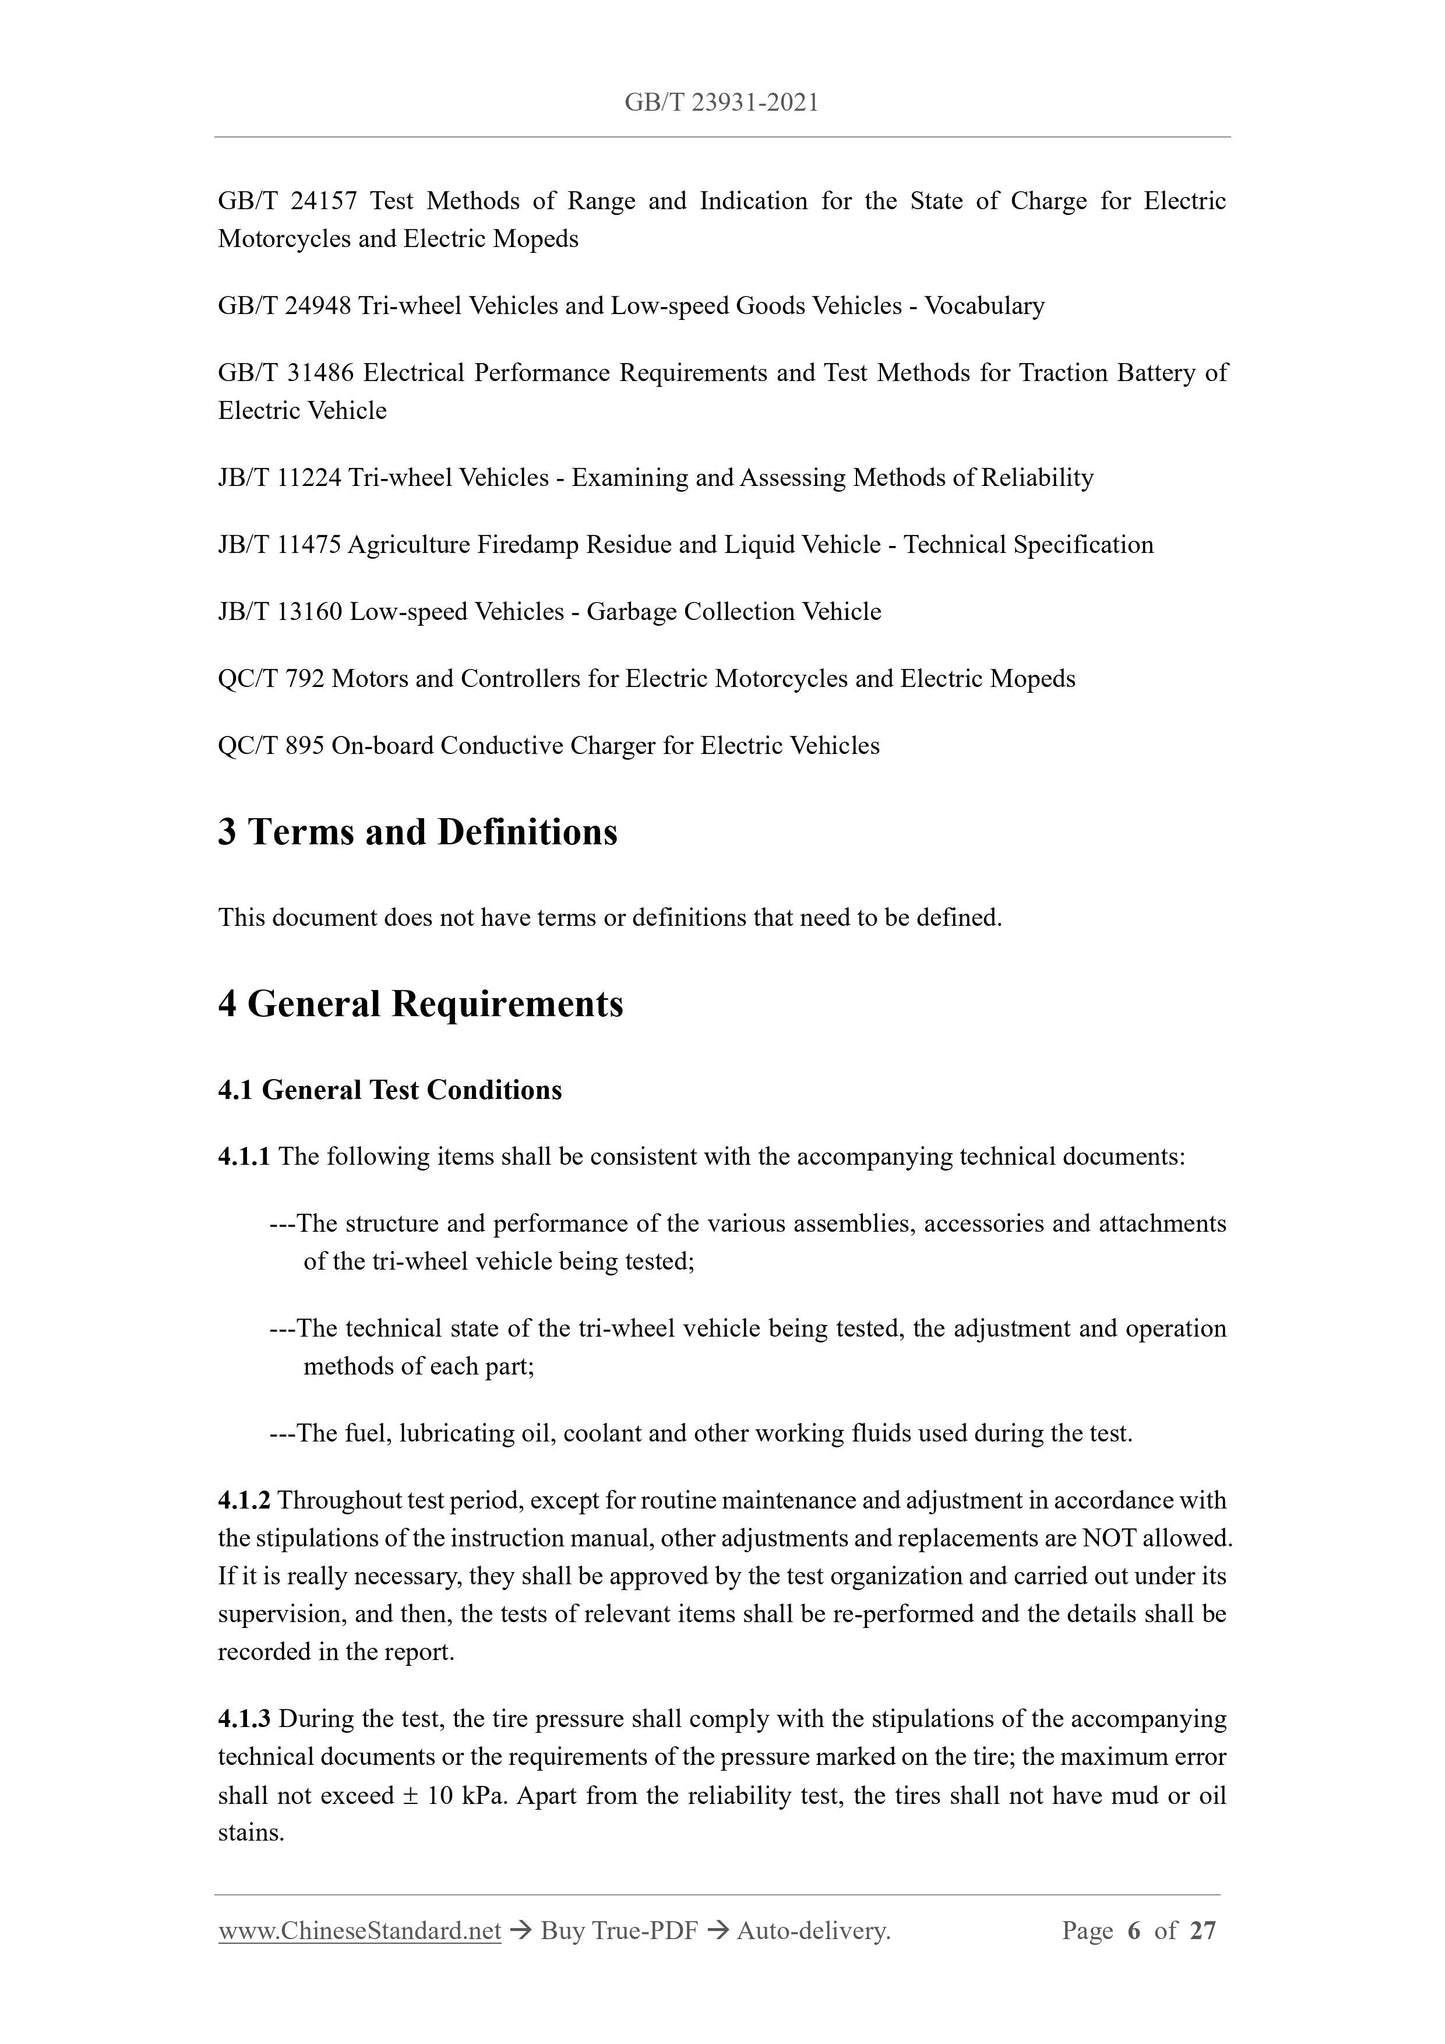 GB/T 23931-2021 Page 3